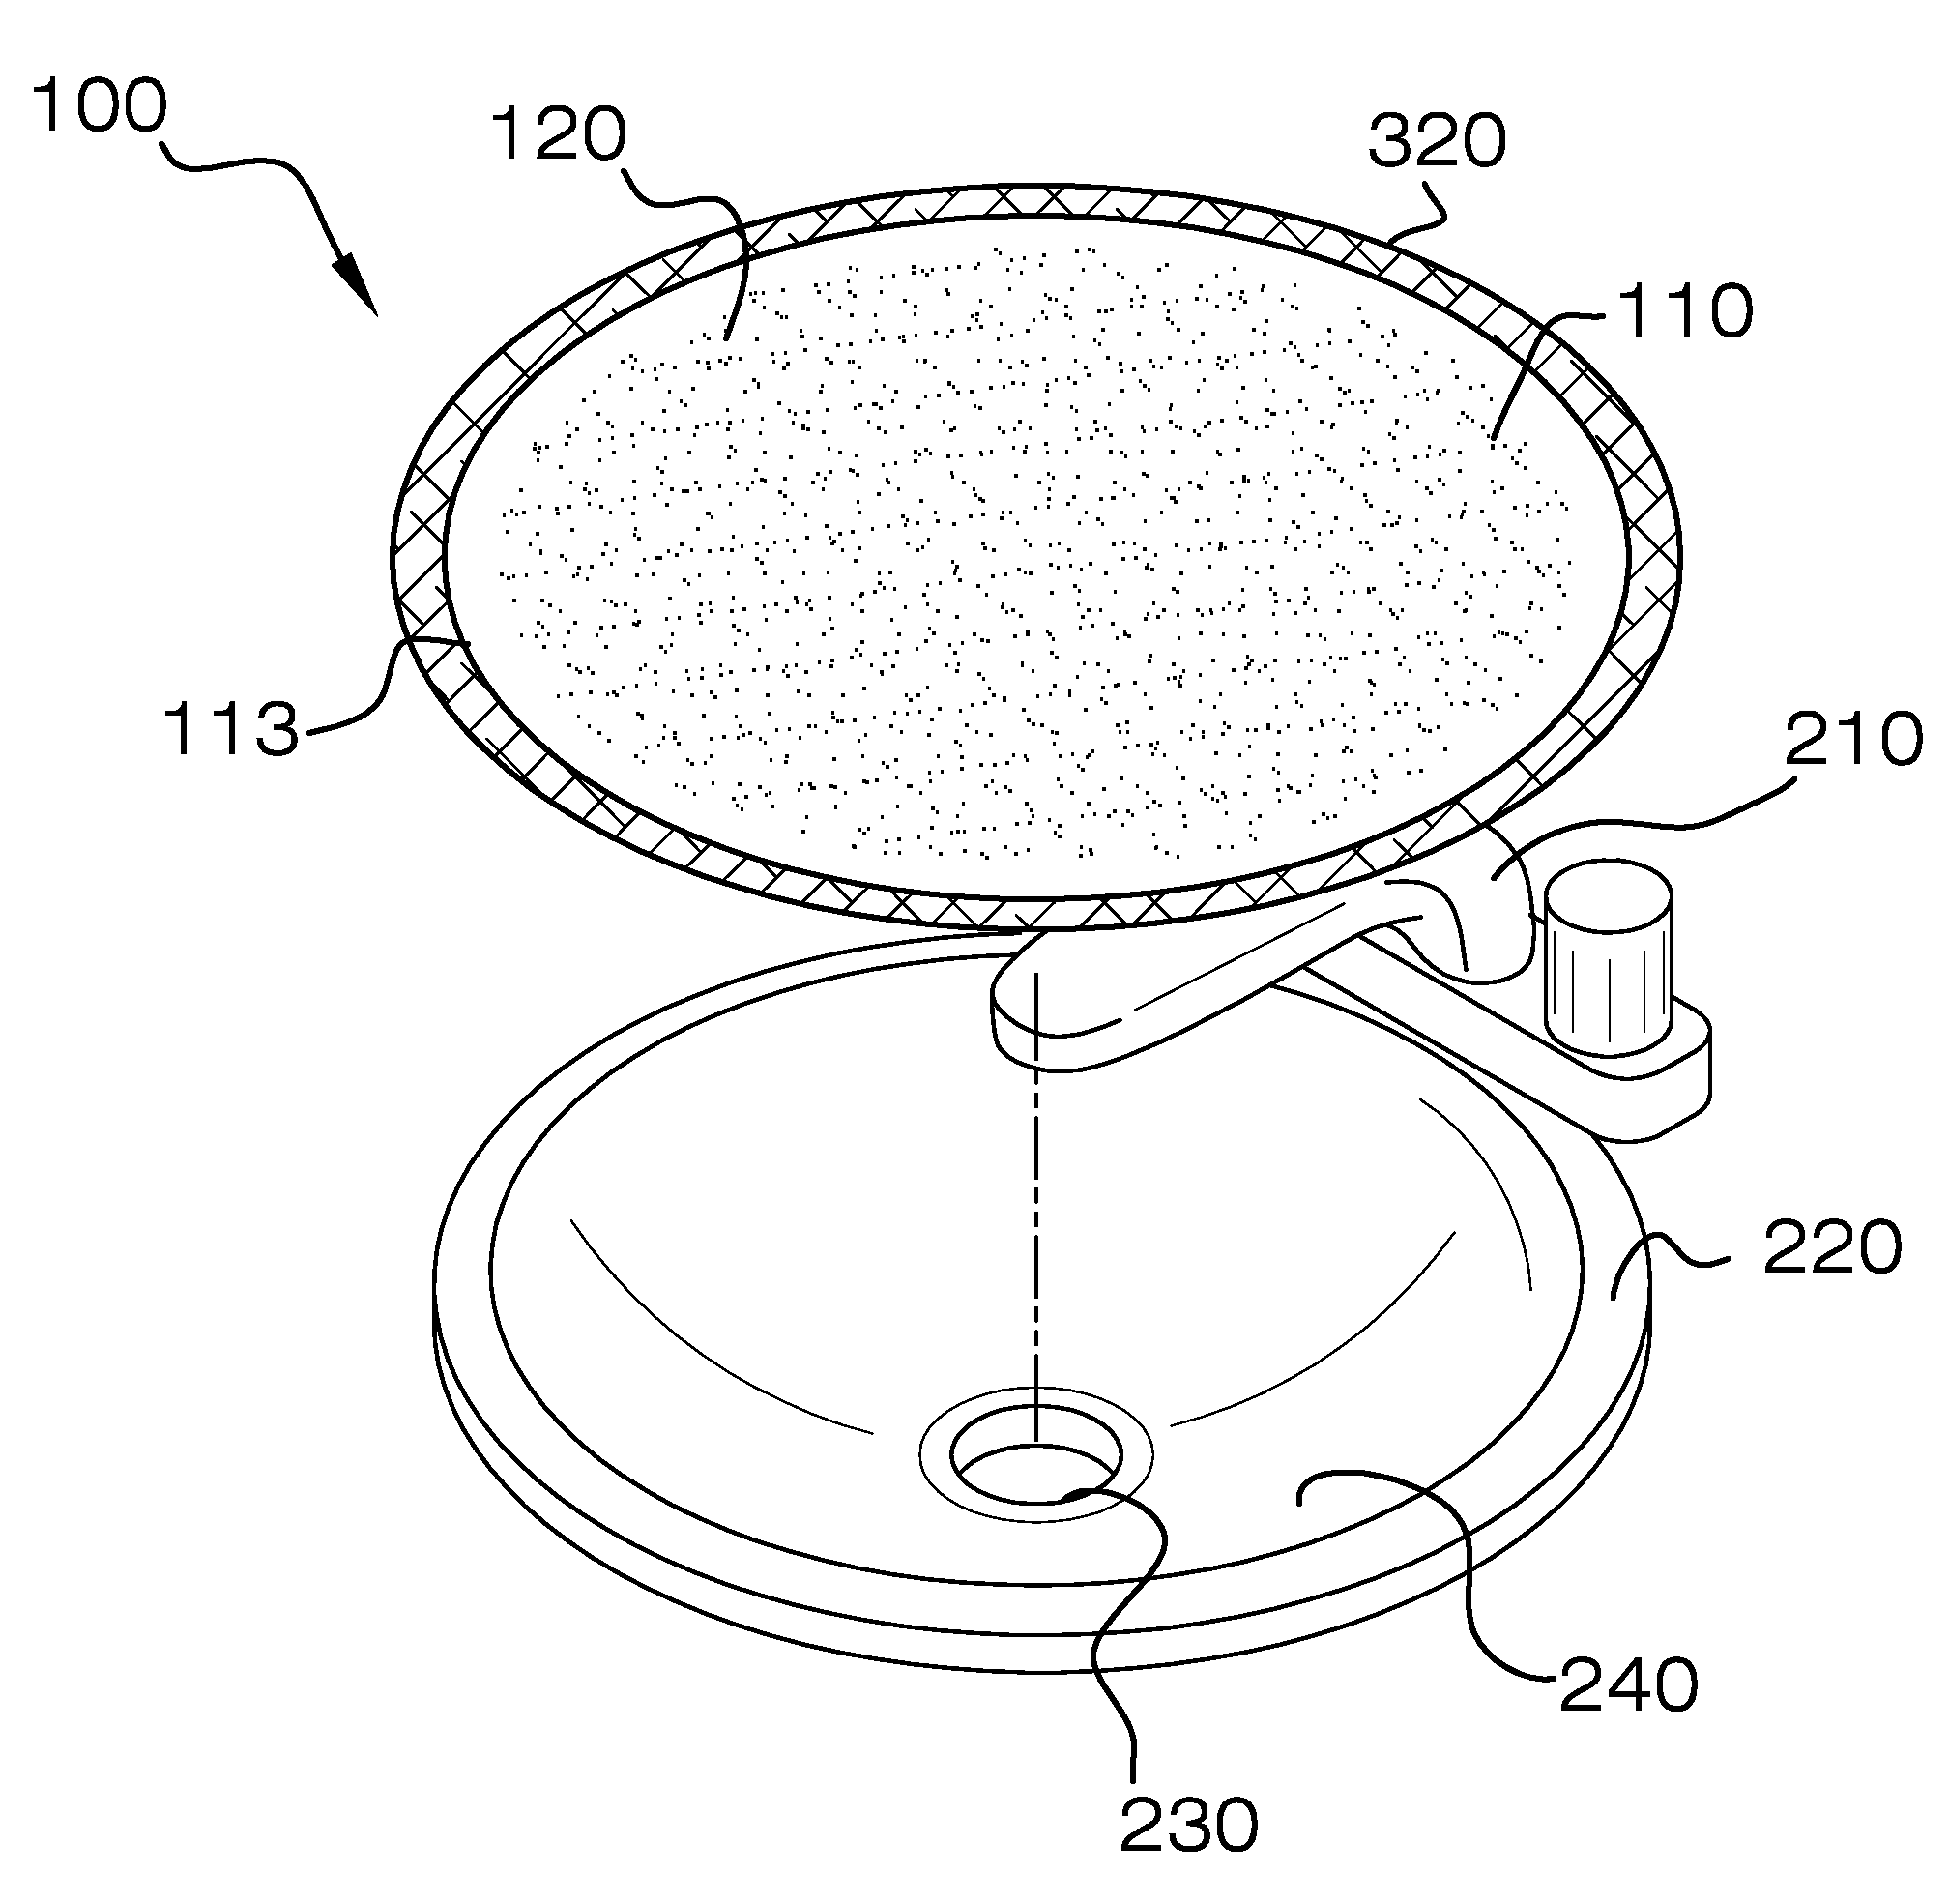 Sink filter device